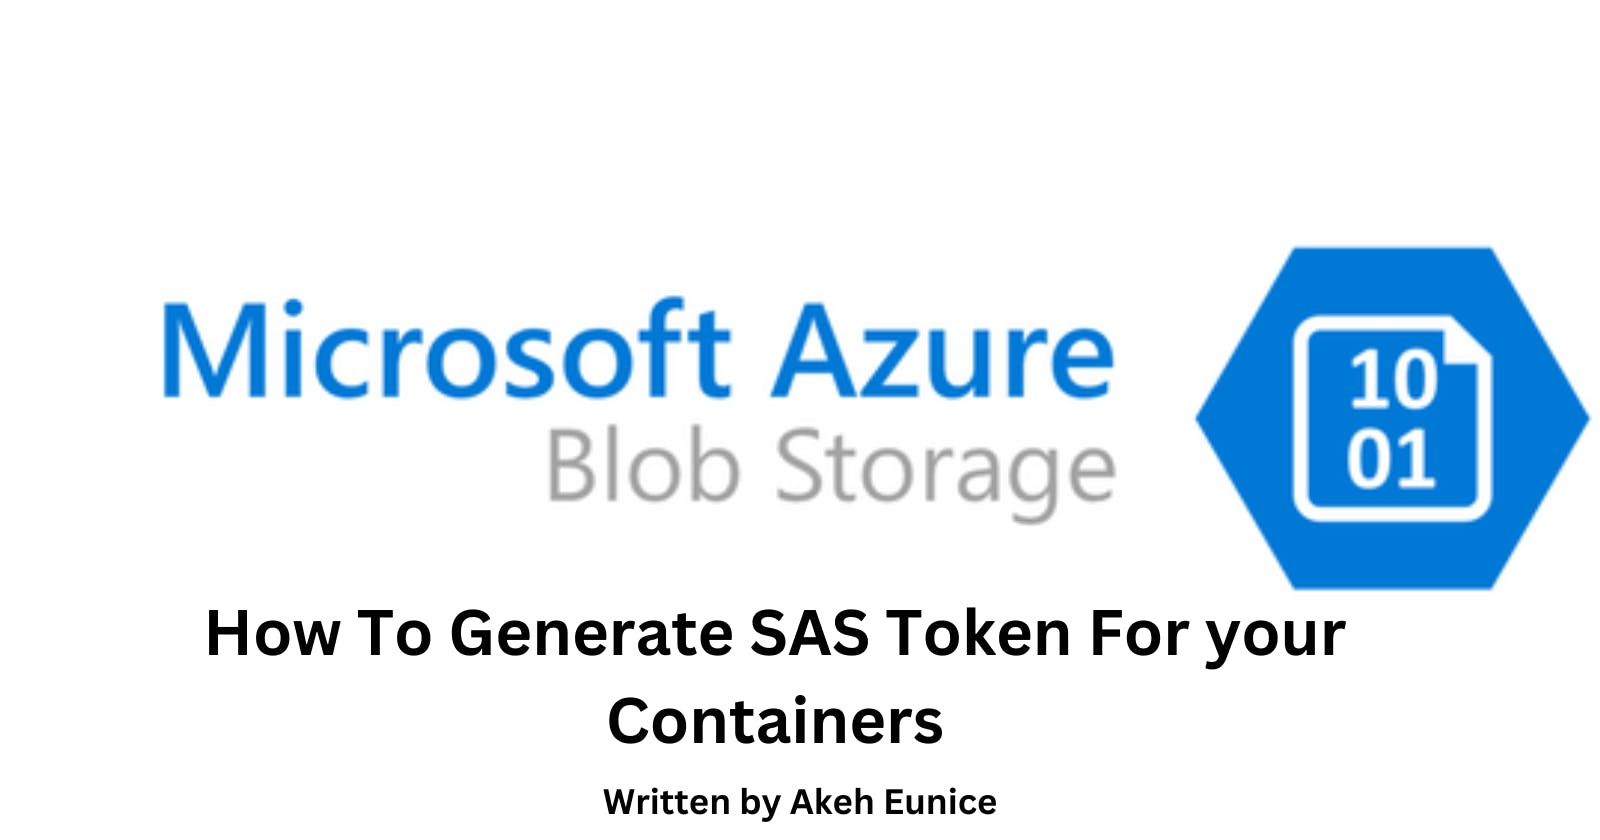 Guide To Creating A SAS Token For your Blob Container